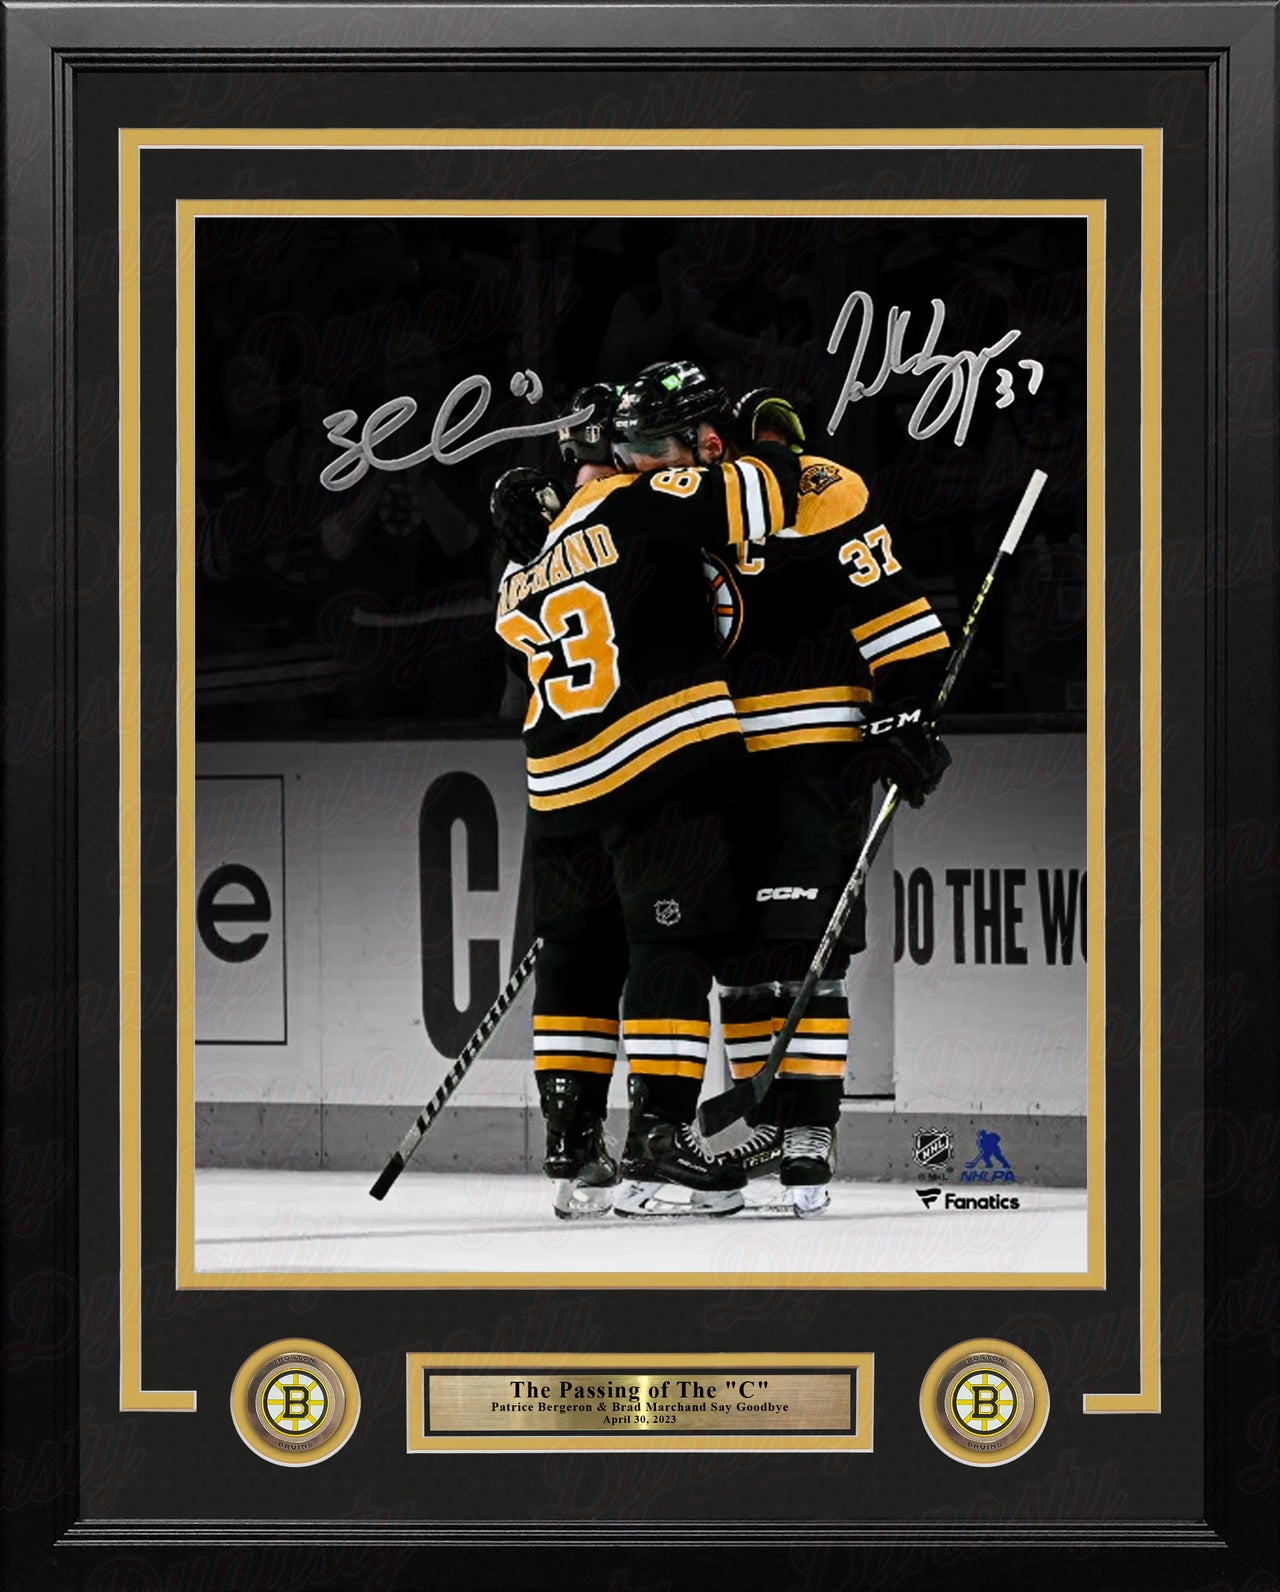 Patrice Bergeron & Brad Marchand Final Game Hug Boston Bruins Autographed 16" x 20" Framed Photo